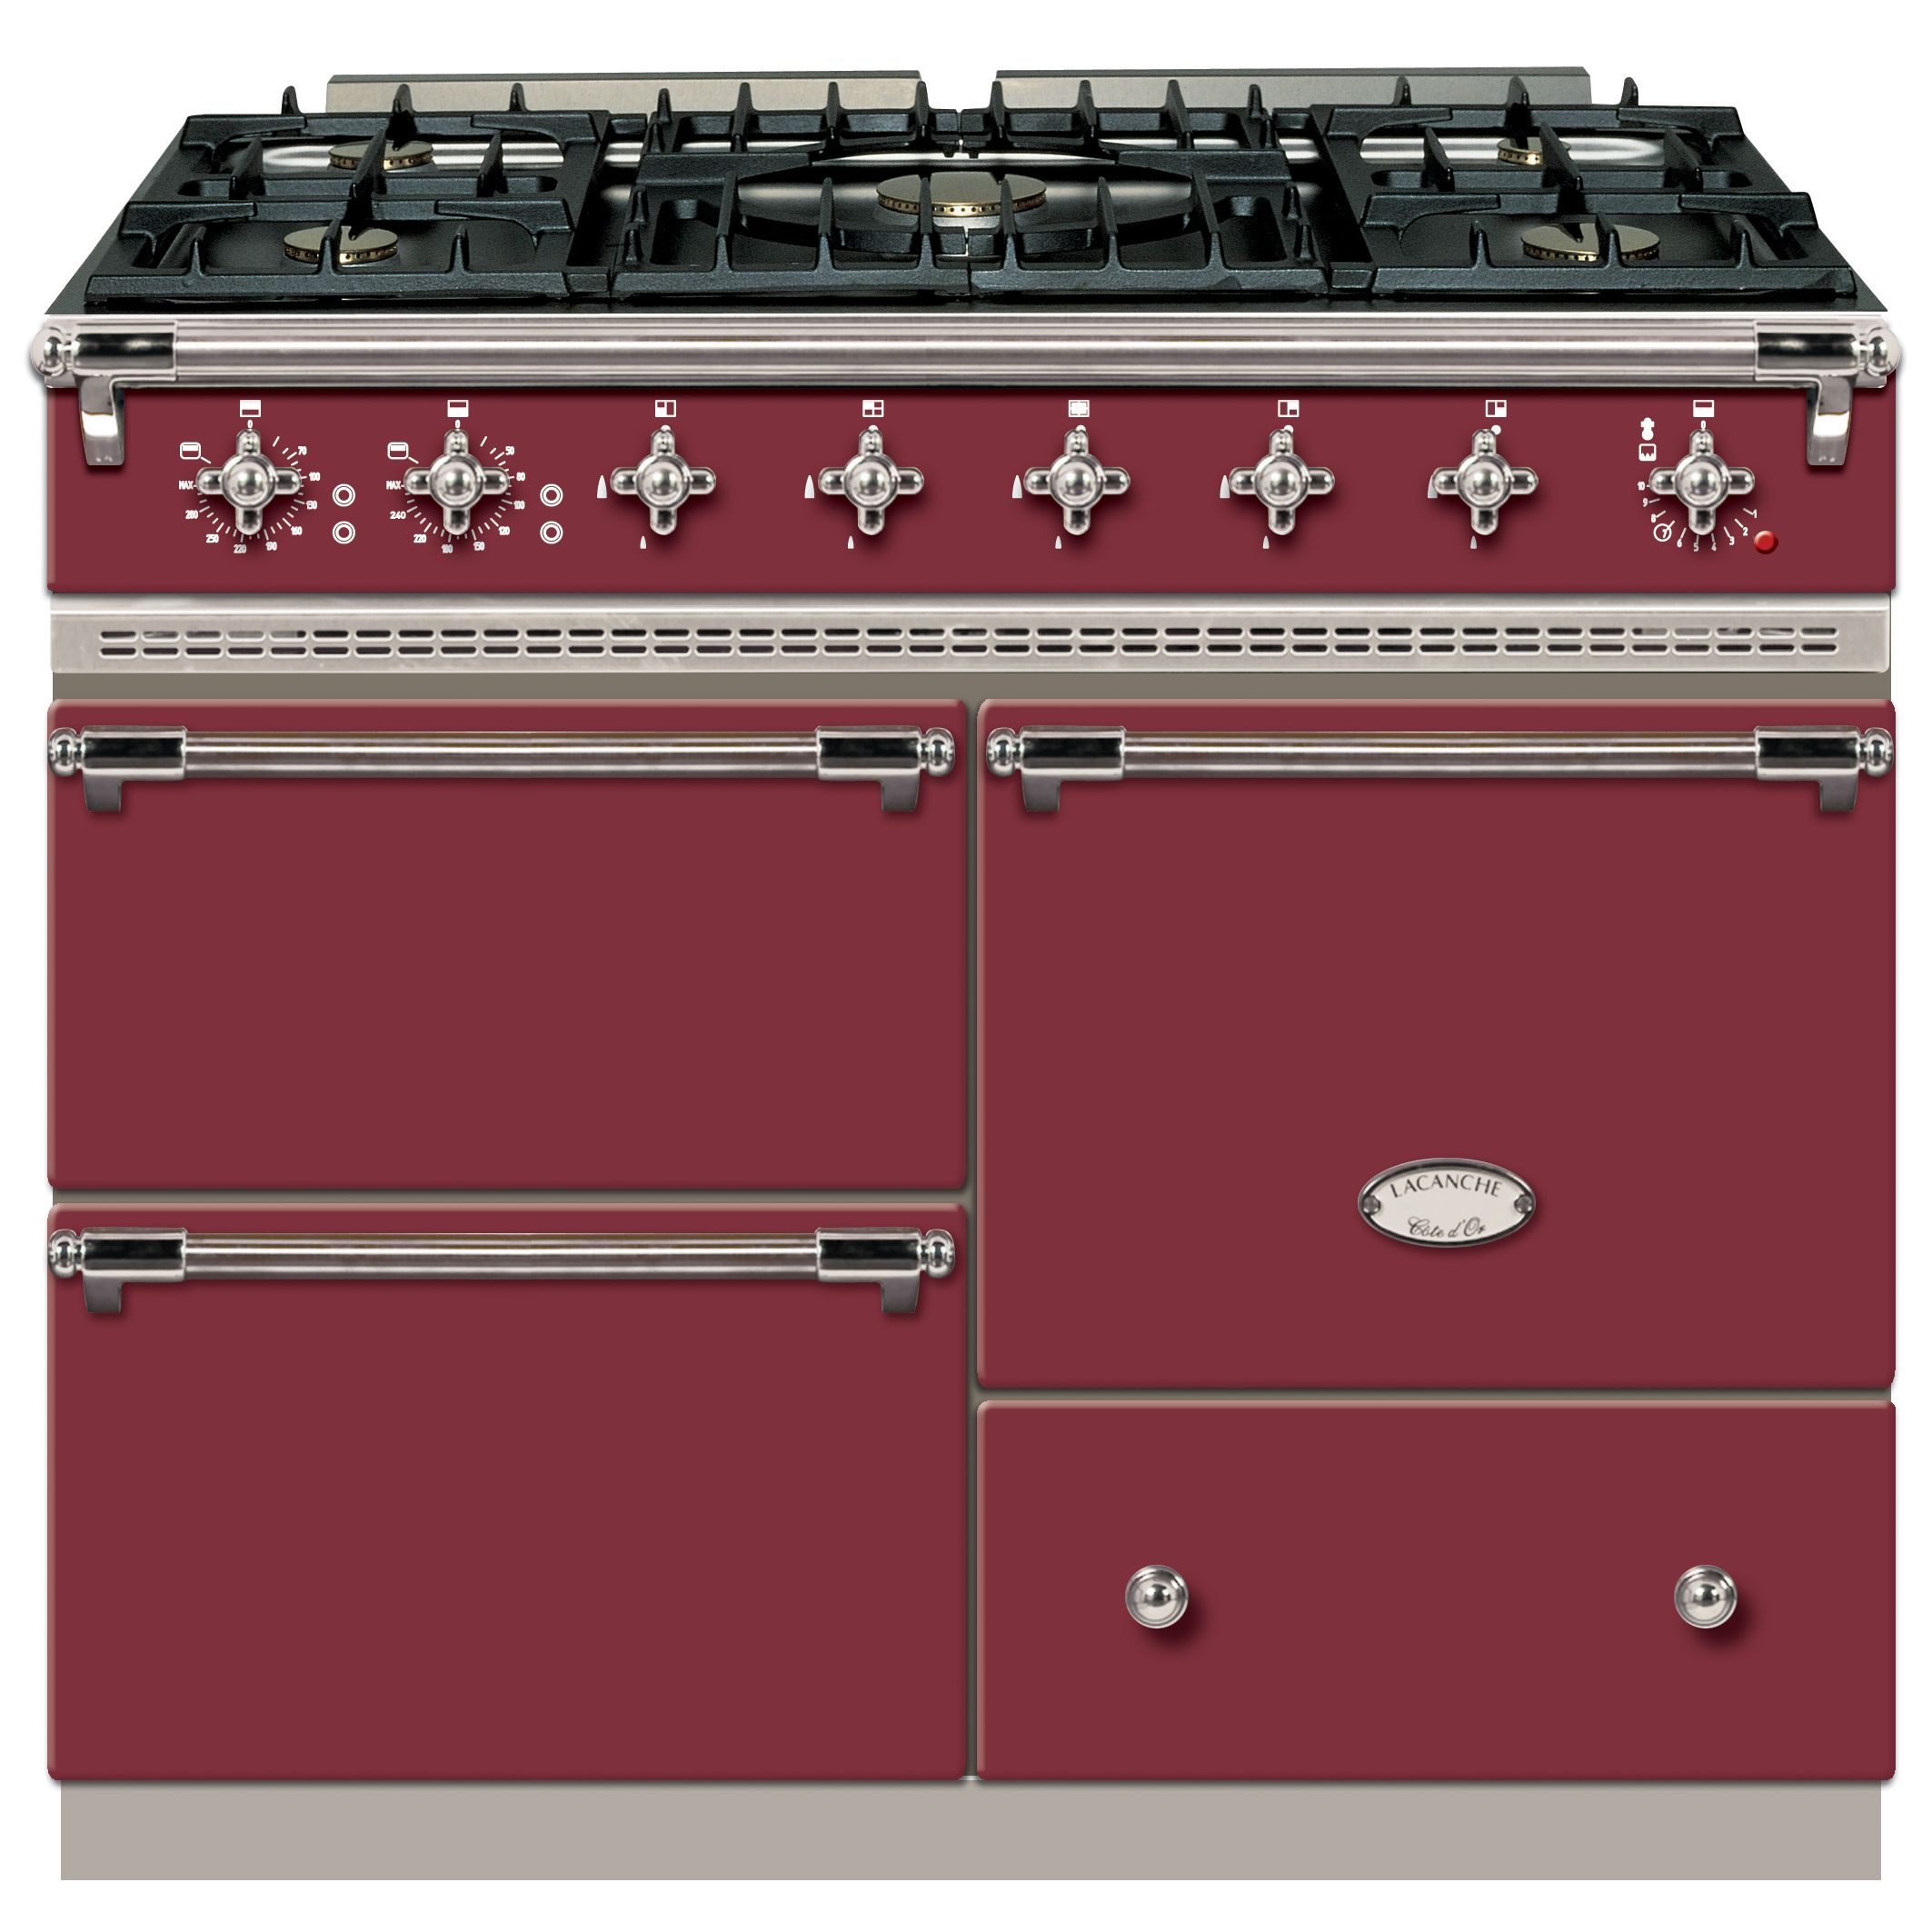 Lacanche Macon LG1053GECT Dual Fuel Cooker, Burgundy Red / Chrome Trim at John Lewis